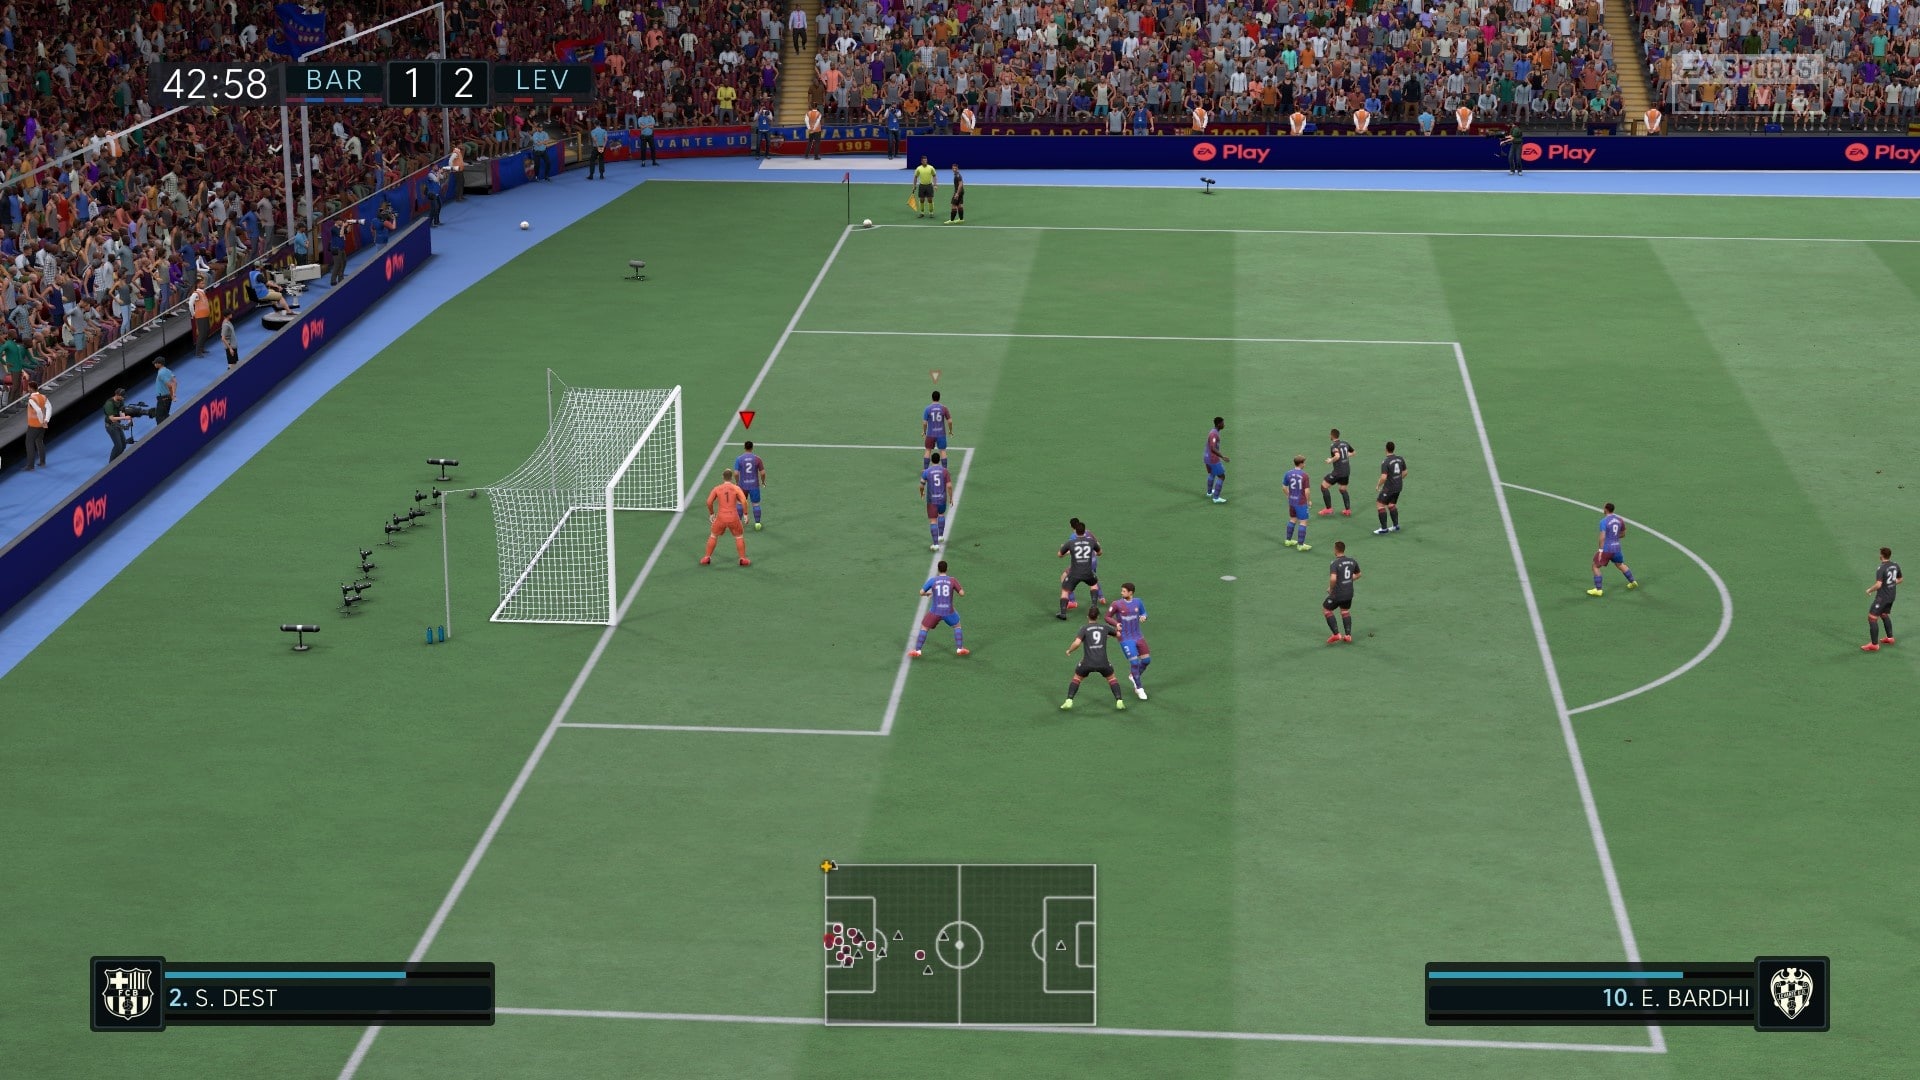 Corner kick in a Spanish league game: crowd and boards look decent in the PC version, but the turf looks like a flat texture from the game perspective.